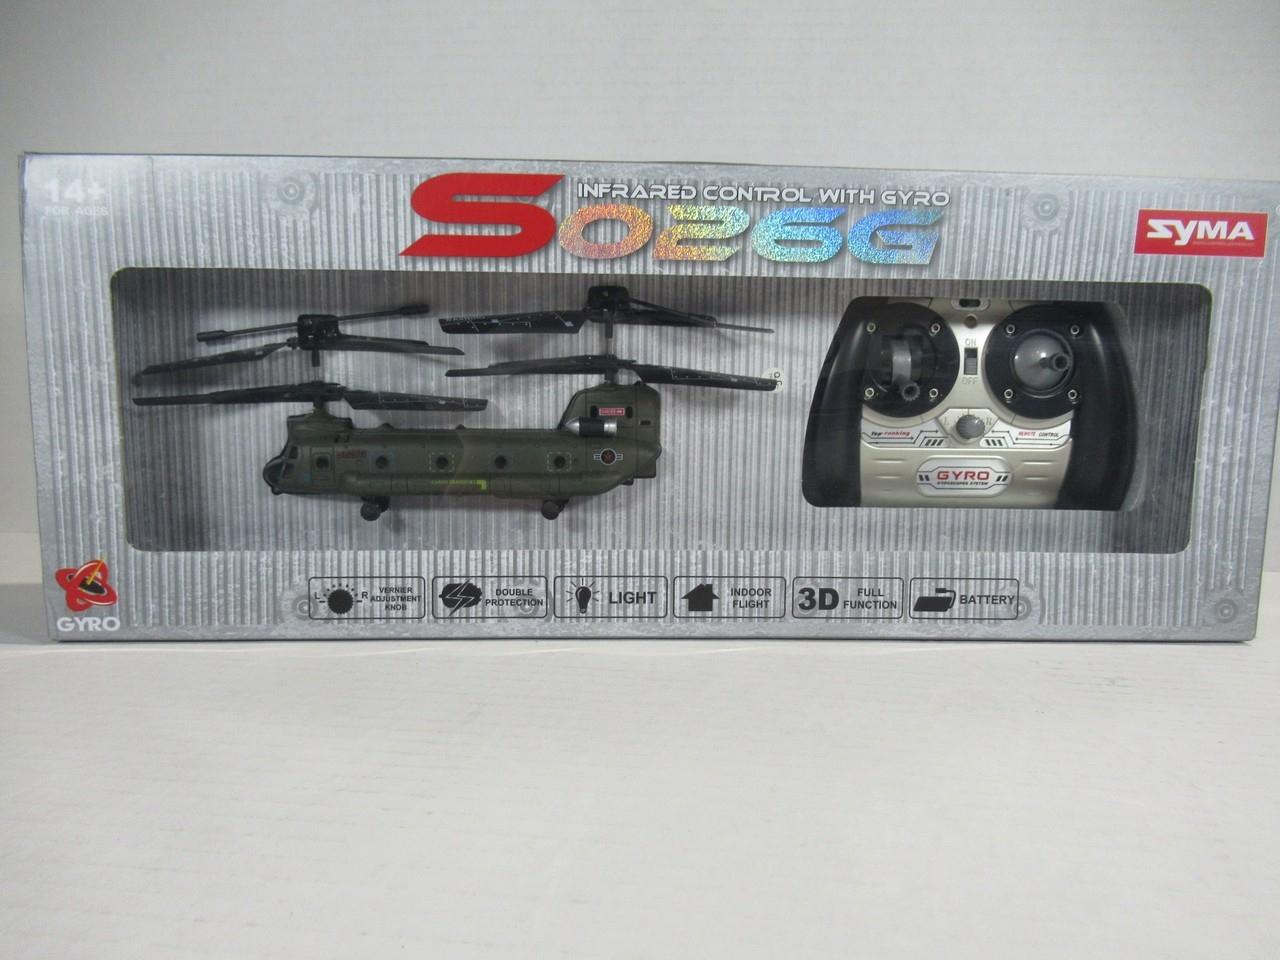 Helicopter Toy & Model Lot